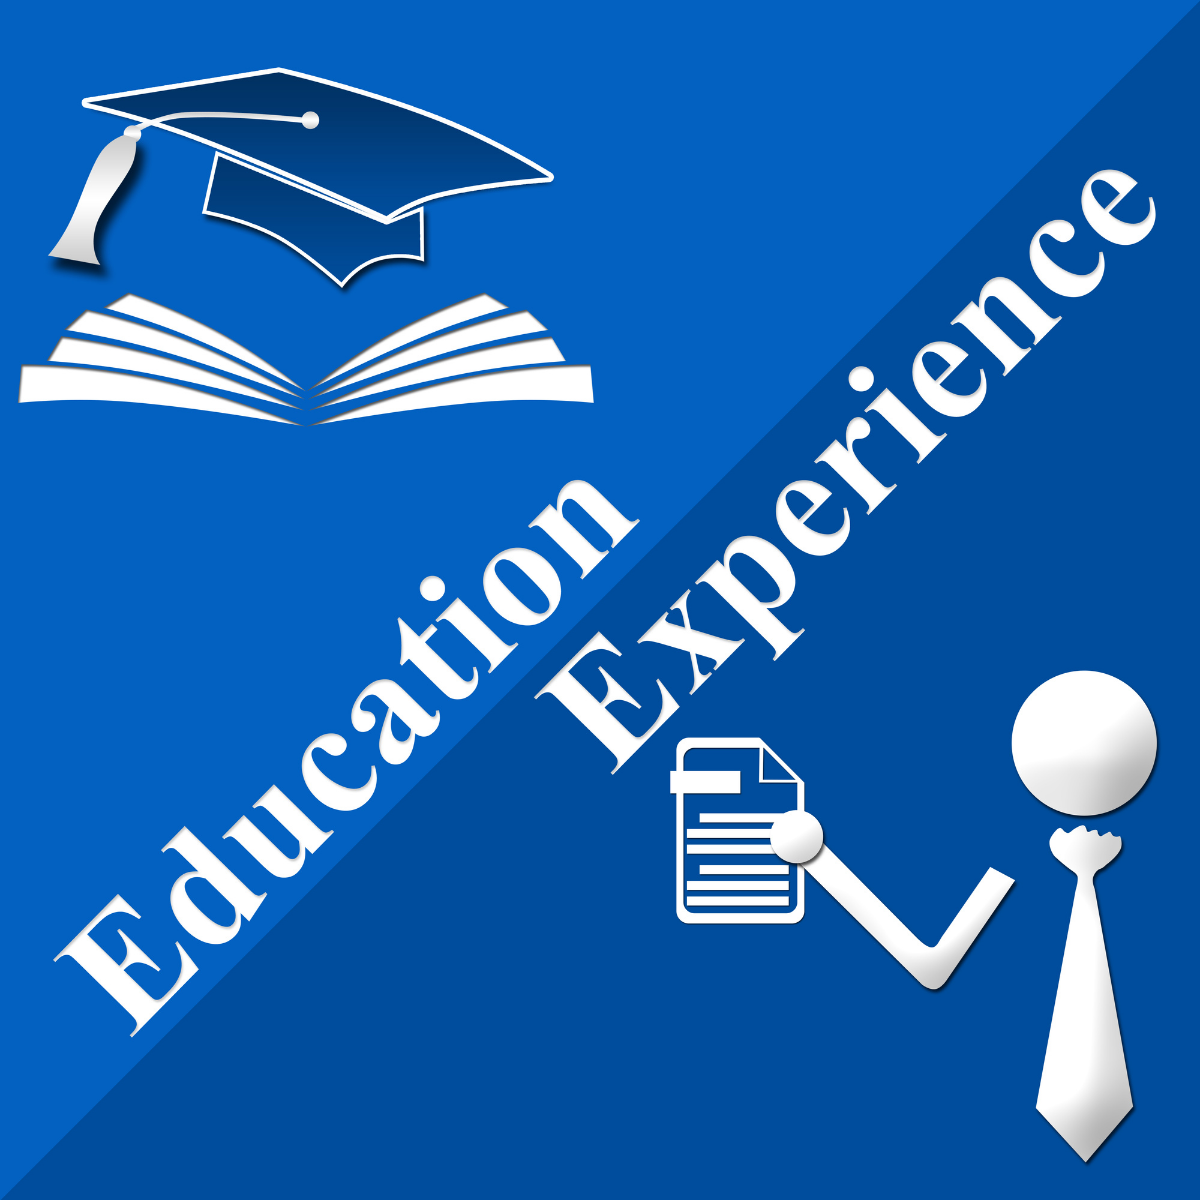 What Is More Important? Education Or Work Experience?